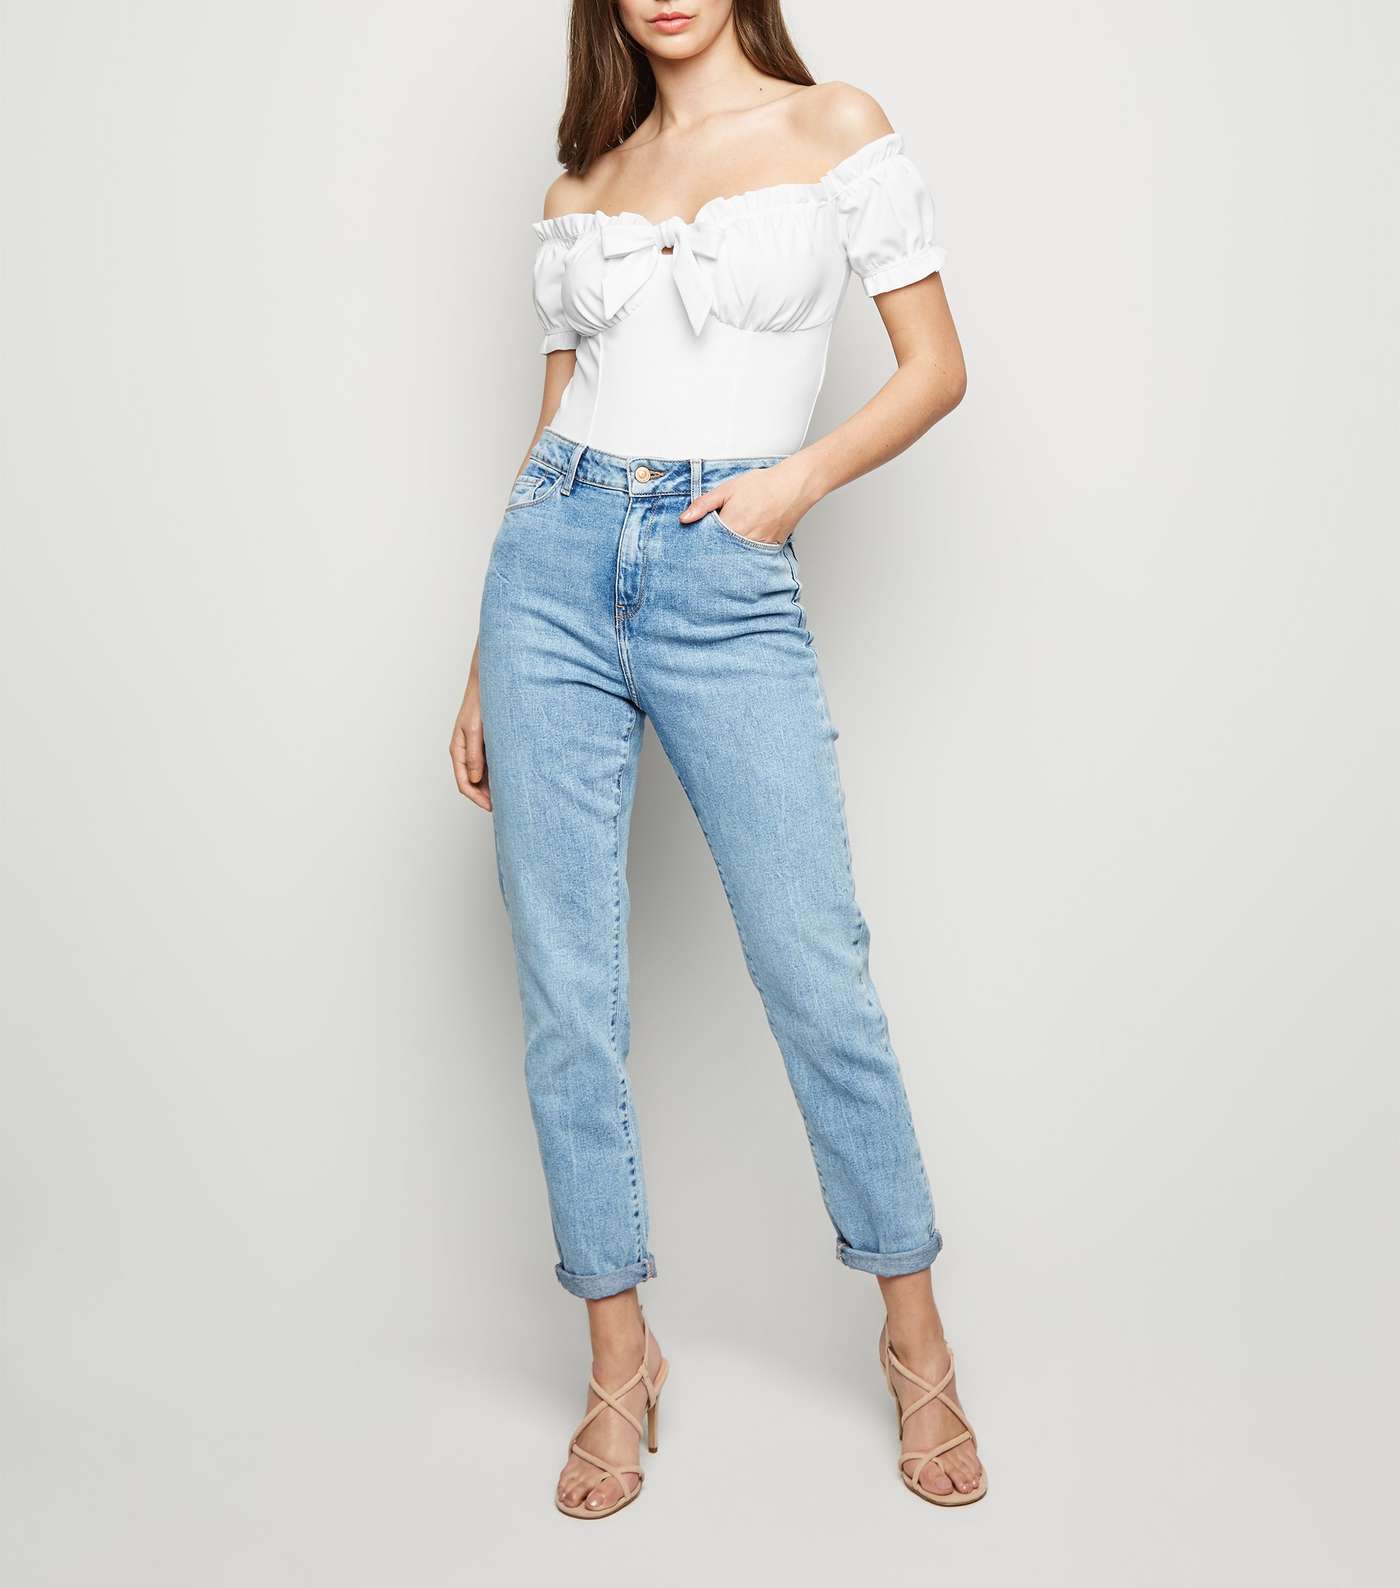 White Bow Front Bardot Crop Top Image 2